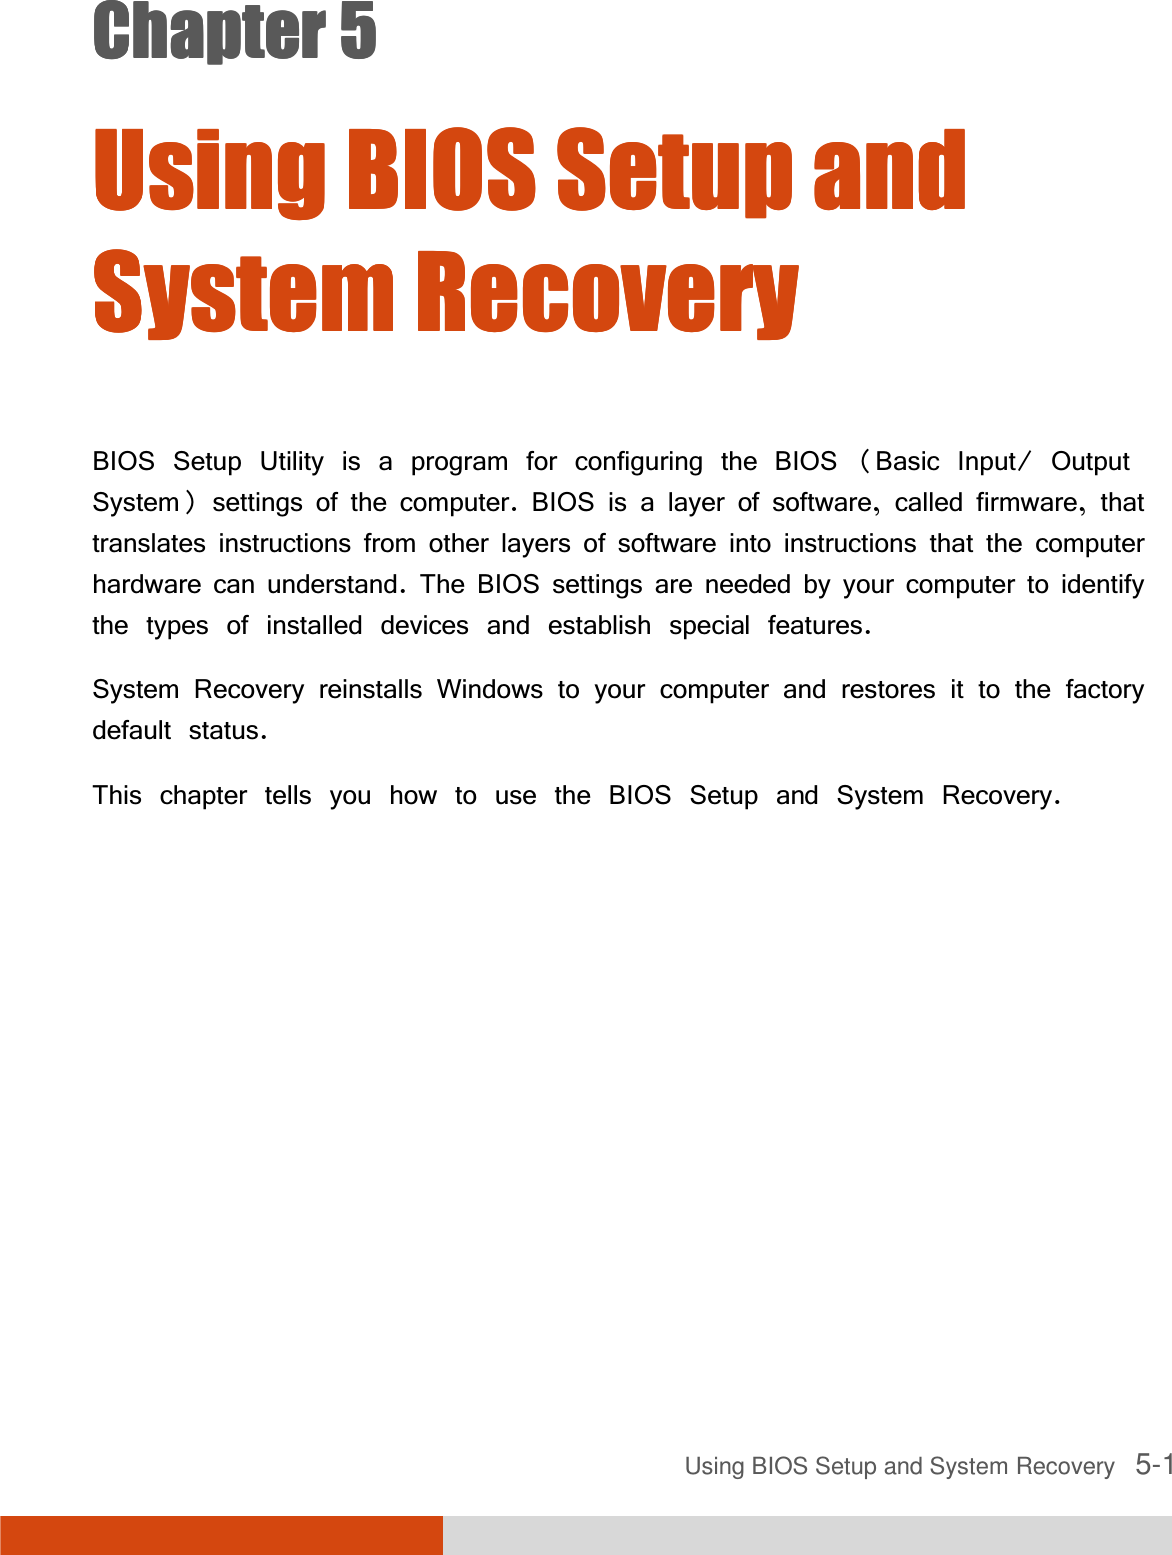 Using BIOS Setup and System Recovery   5-1Chapter 5Chapter 5Chapter 5Chapter 5     Using BIOS Setup and Using BIOS Setup and Using BIOS Setup and Using BIOS Setup and System RecoverySystem RecoverySystem RecoverySystem Recovery    BIOS Setup Utility is a program for configuring the BIOS (Basic Input/ Output System) settings of the computer. BIOS is a layer of software, called firmware, that translates instructions from other layers of software into instructions that the computer hardware can understand. The BIOS settings are needed by your computer to identify the types of installed devices and establish special features. System Recovery reinstalls Windows to your computer and restores it to the factory default status. This chapter tells you how to use the BIOS Setup and System Recovery. 